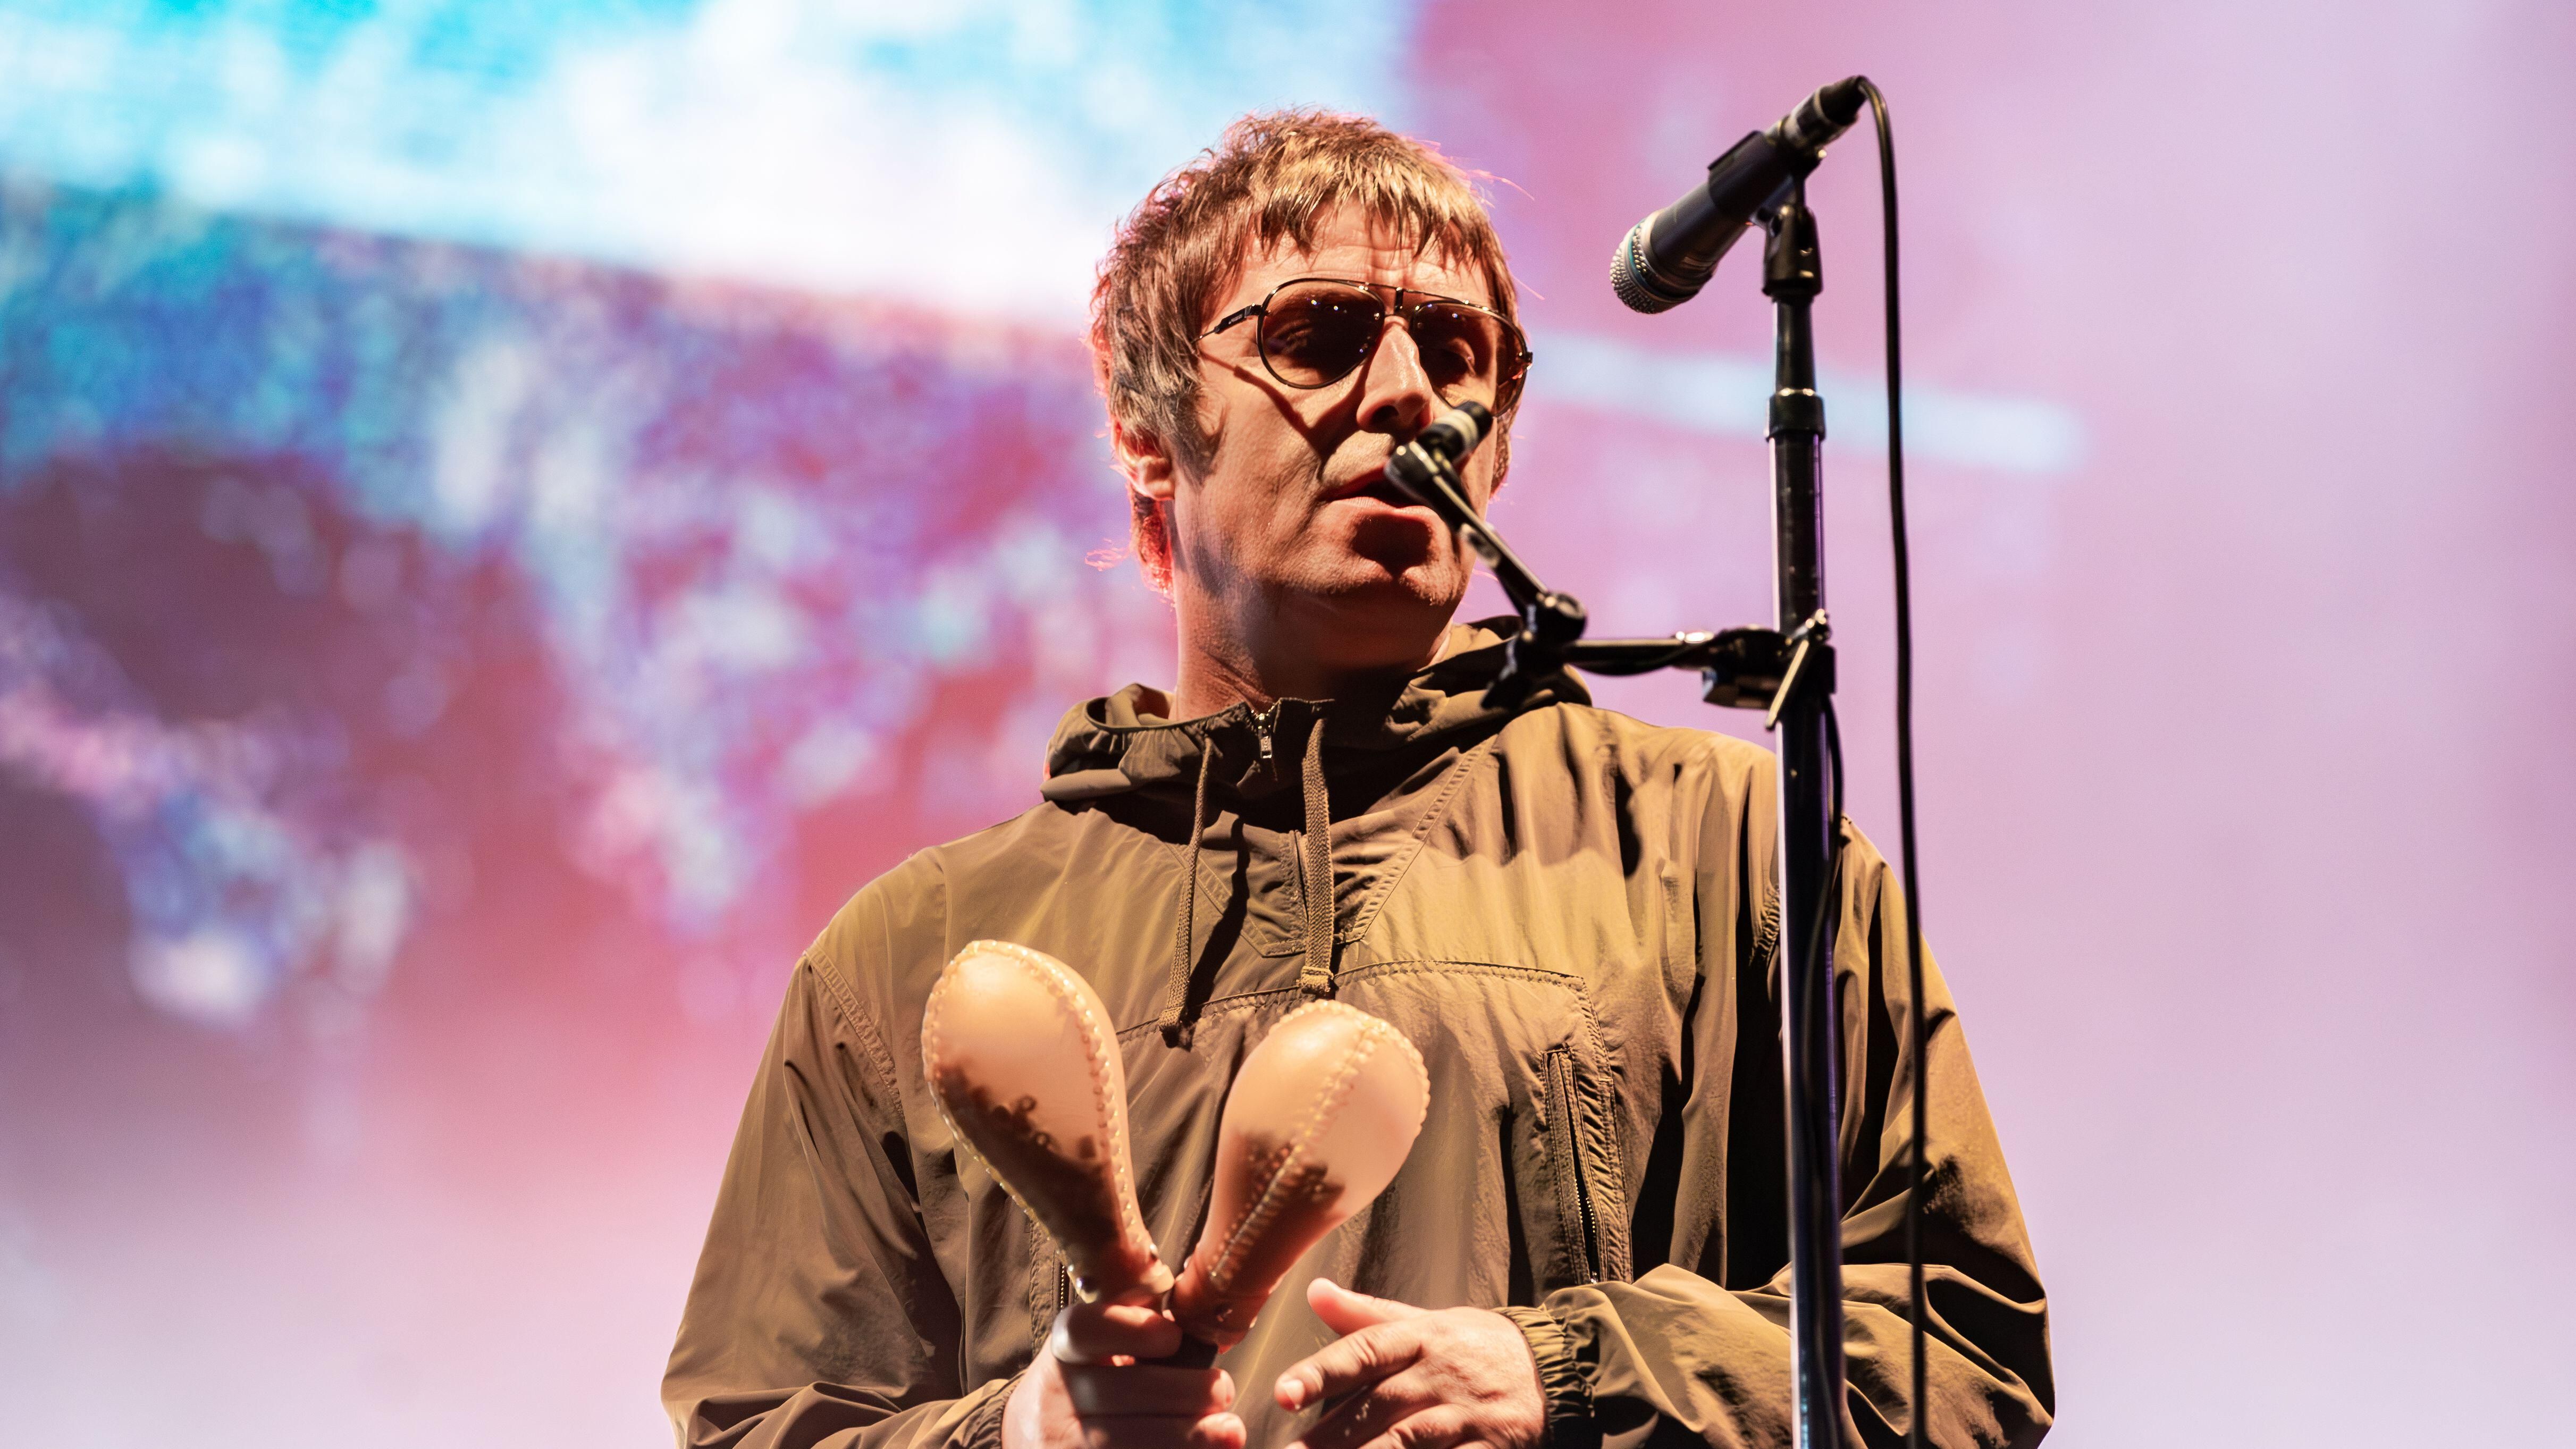 Oasis star Liam Gallagher makes Manchester tram announcements